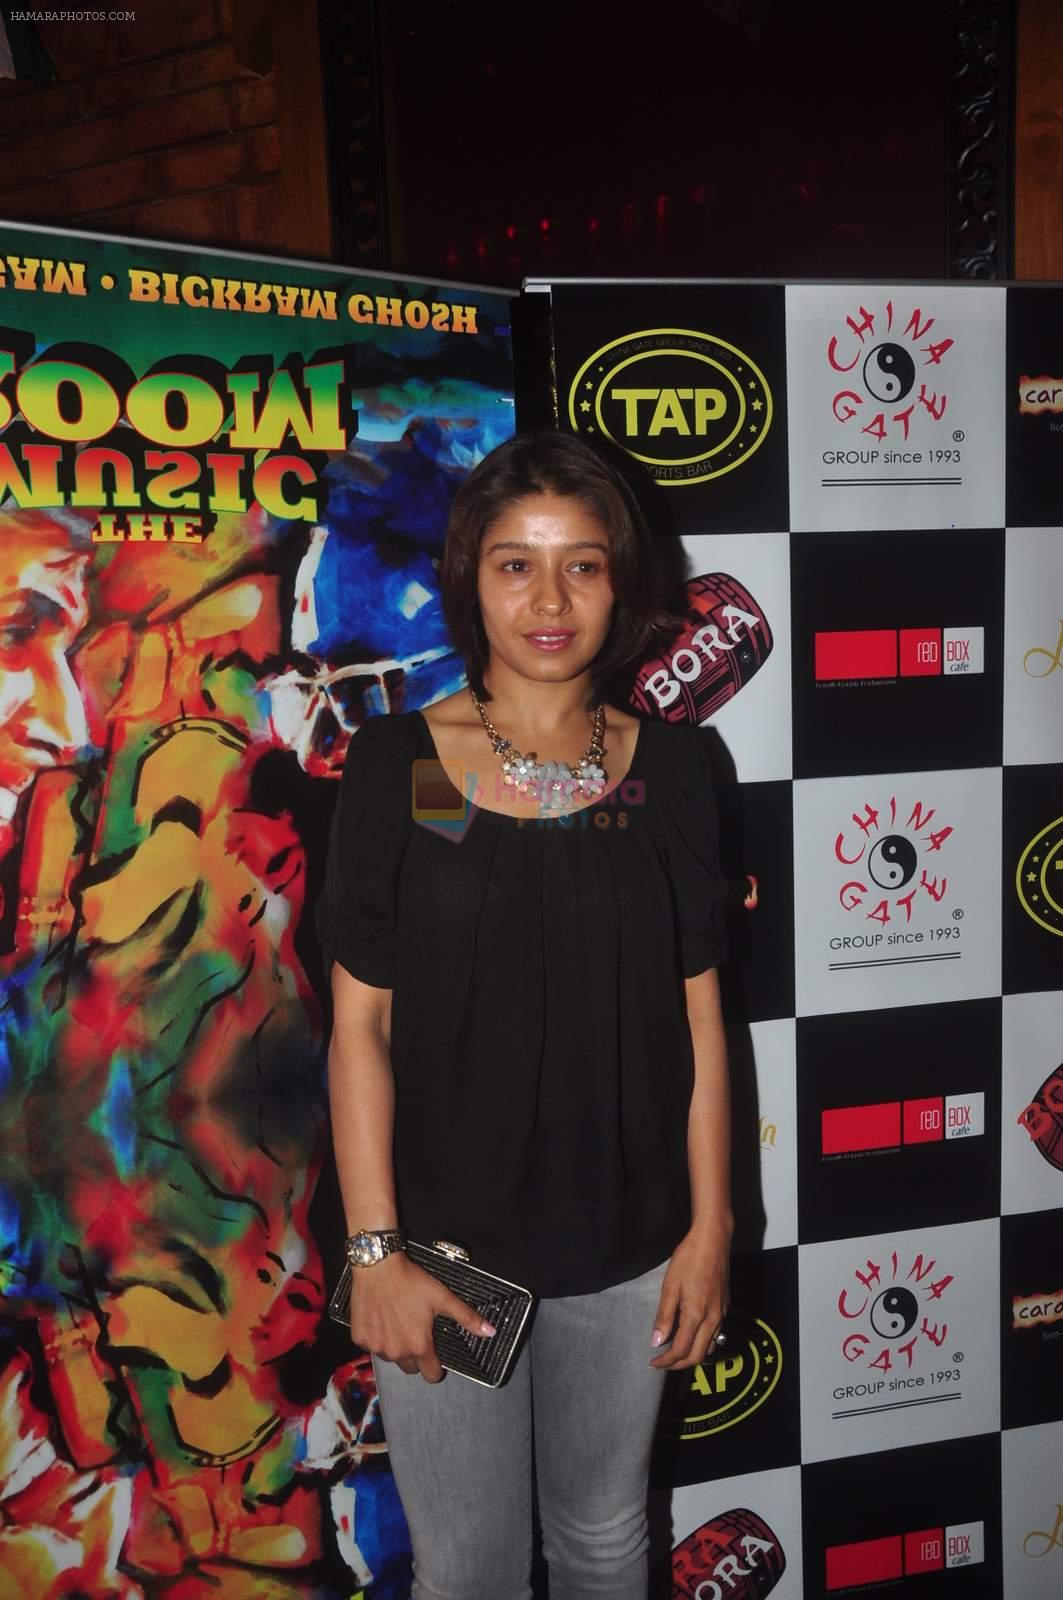 Sunidhi Chauhan at Bickram ghosh's album launch in Tap Bar on 25th Feb 2015